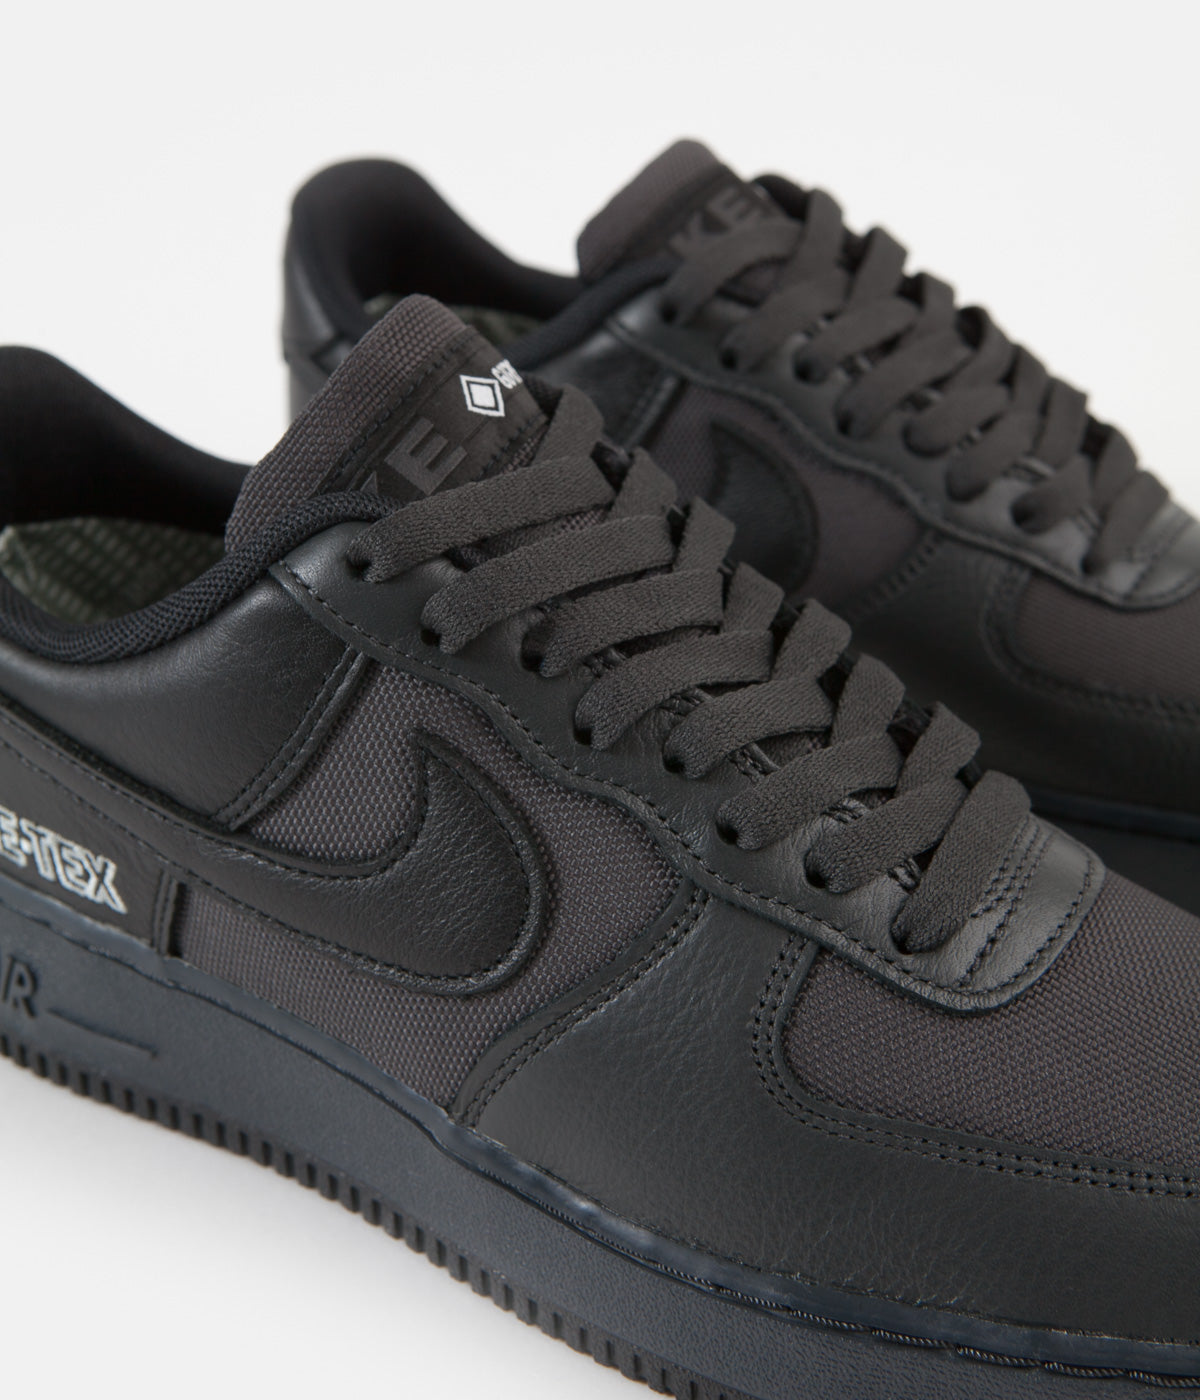 black and gray air force 1